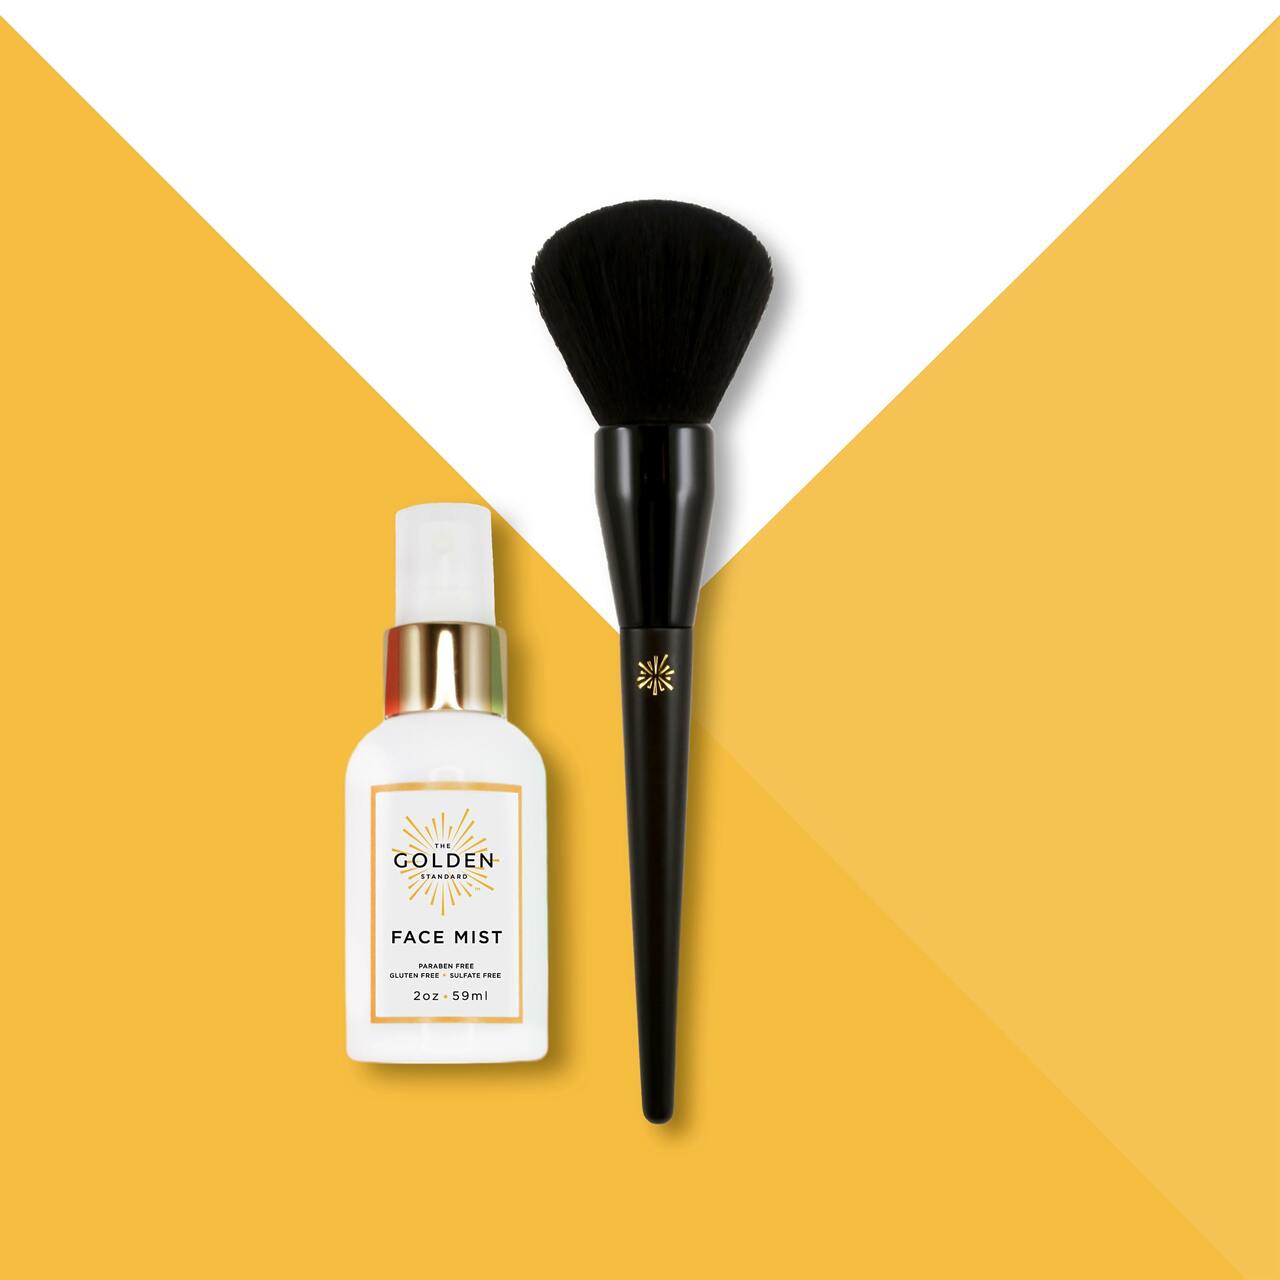 The Golden Standard Sunless Face Mist with Brush